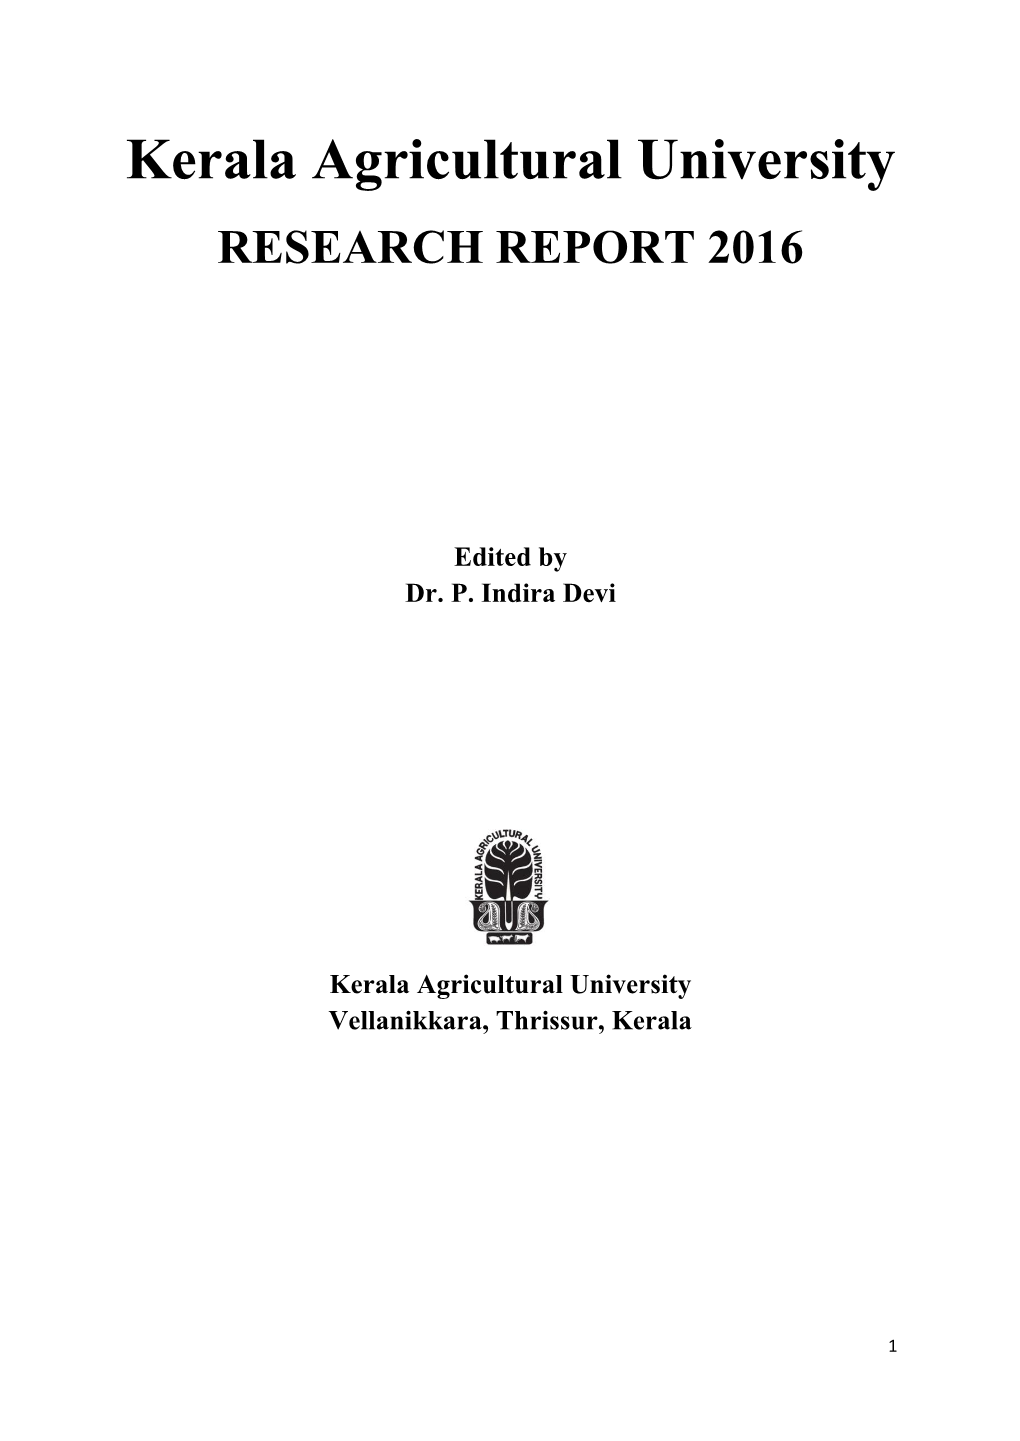 Research Report 2016